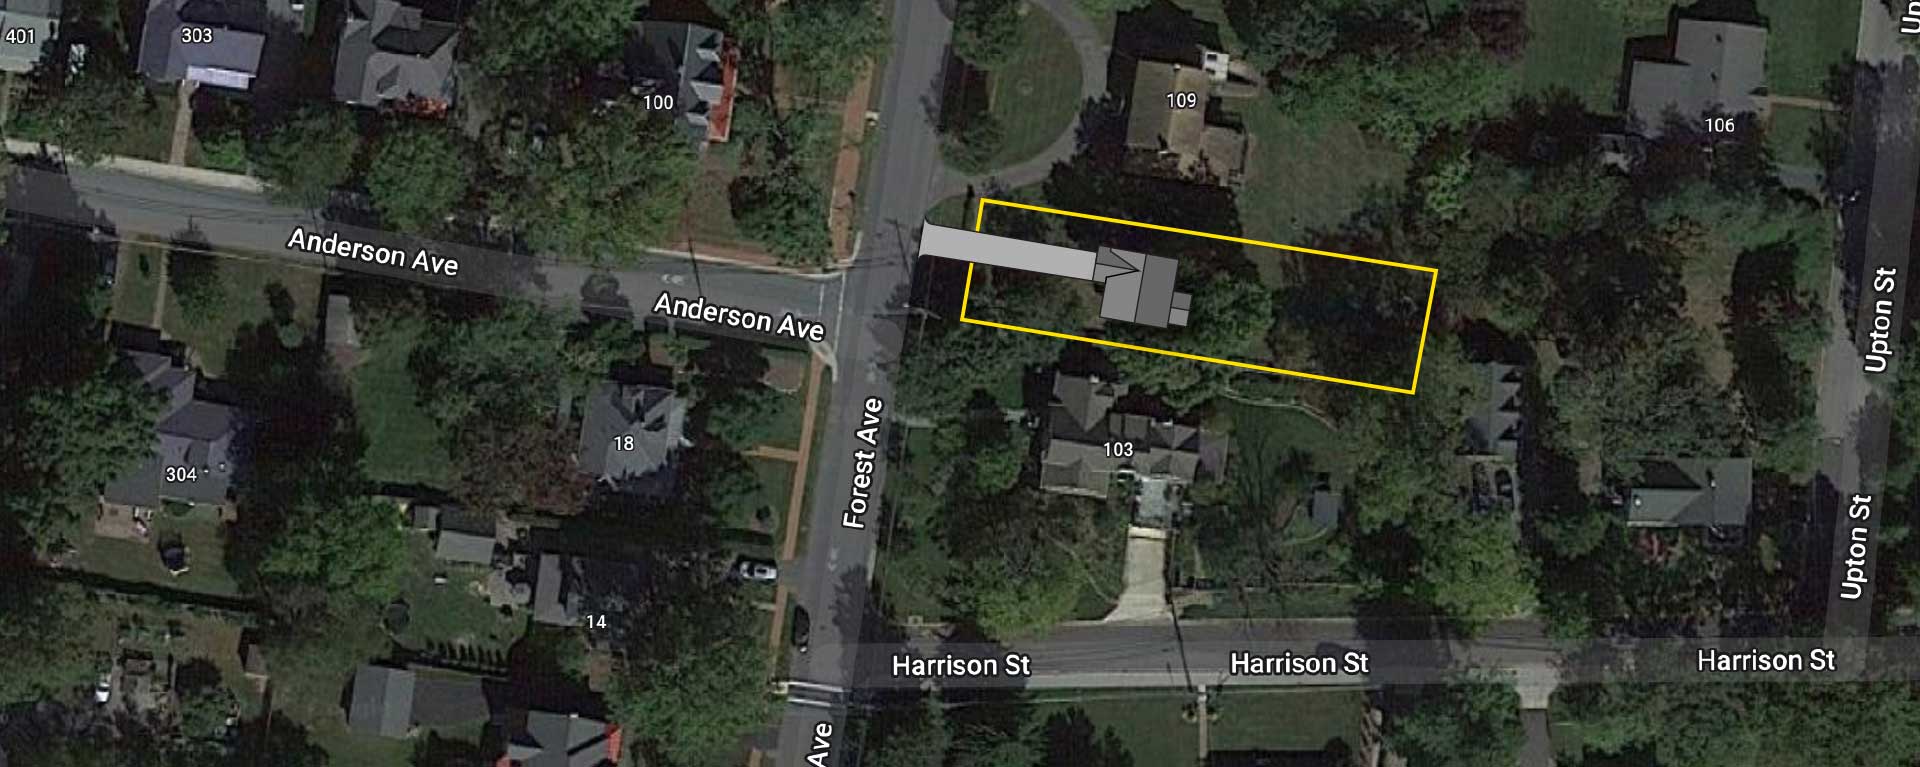 A satellite image showing the site outline and placement of the home proposed for the vacant lot at 105 Forest Ave Rockville MD